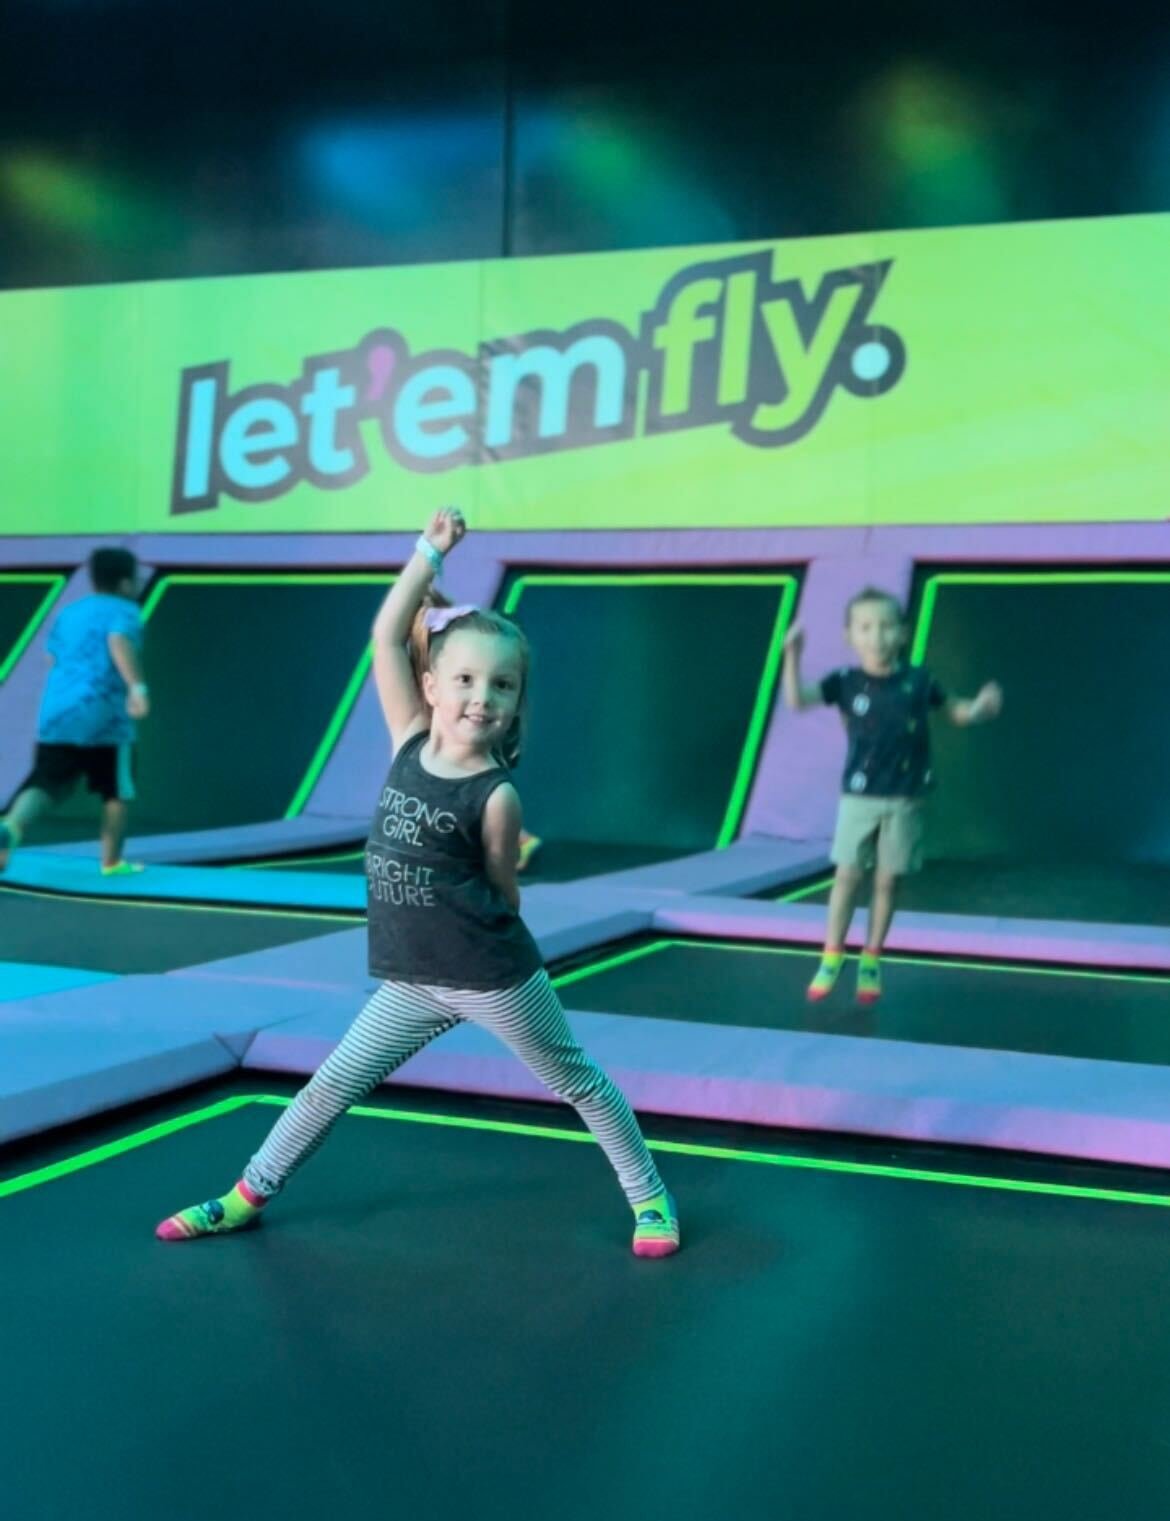 girl on trampoline with let em fly text on green wall